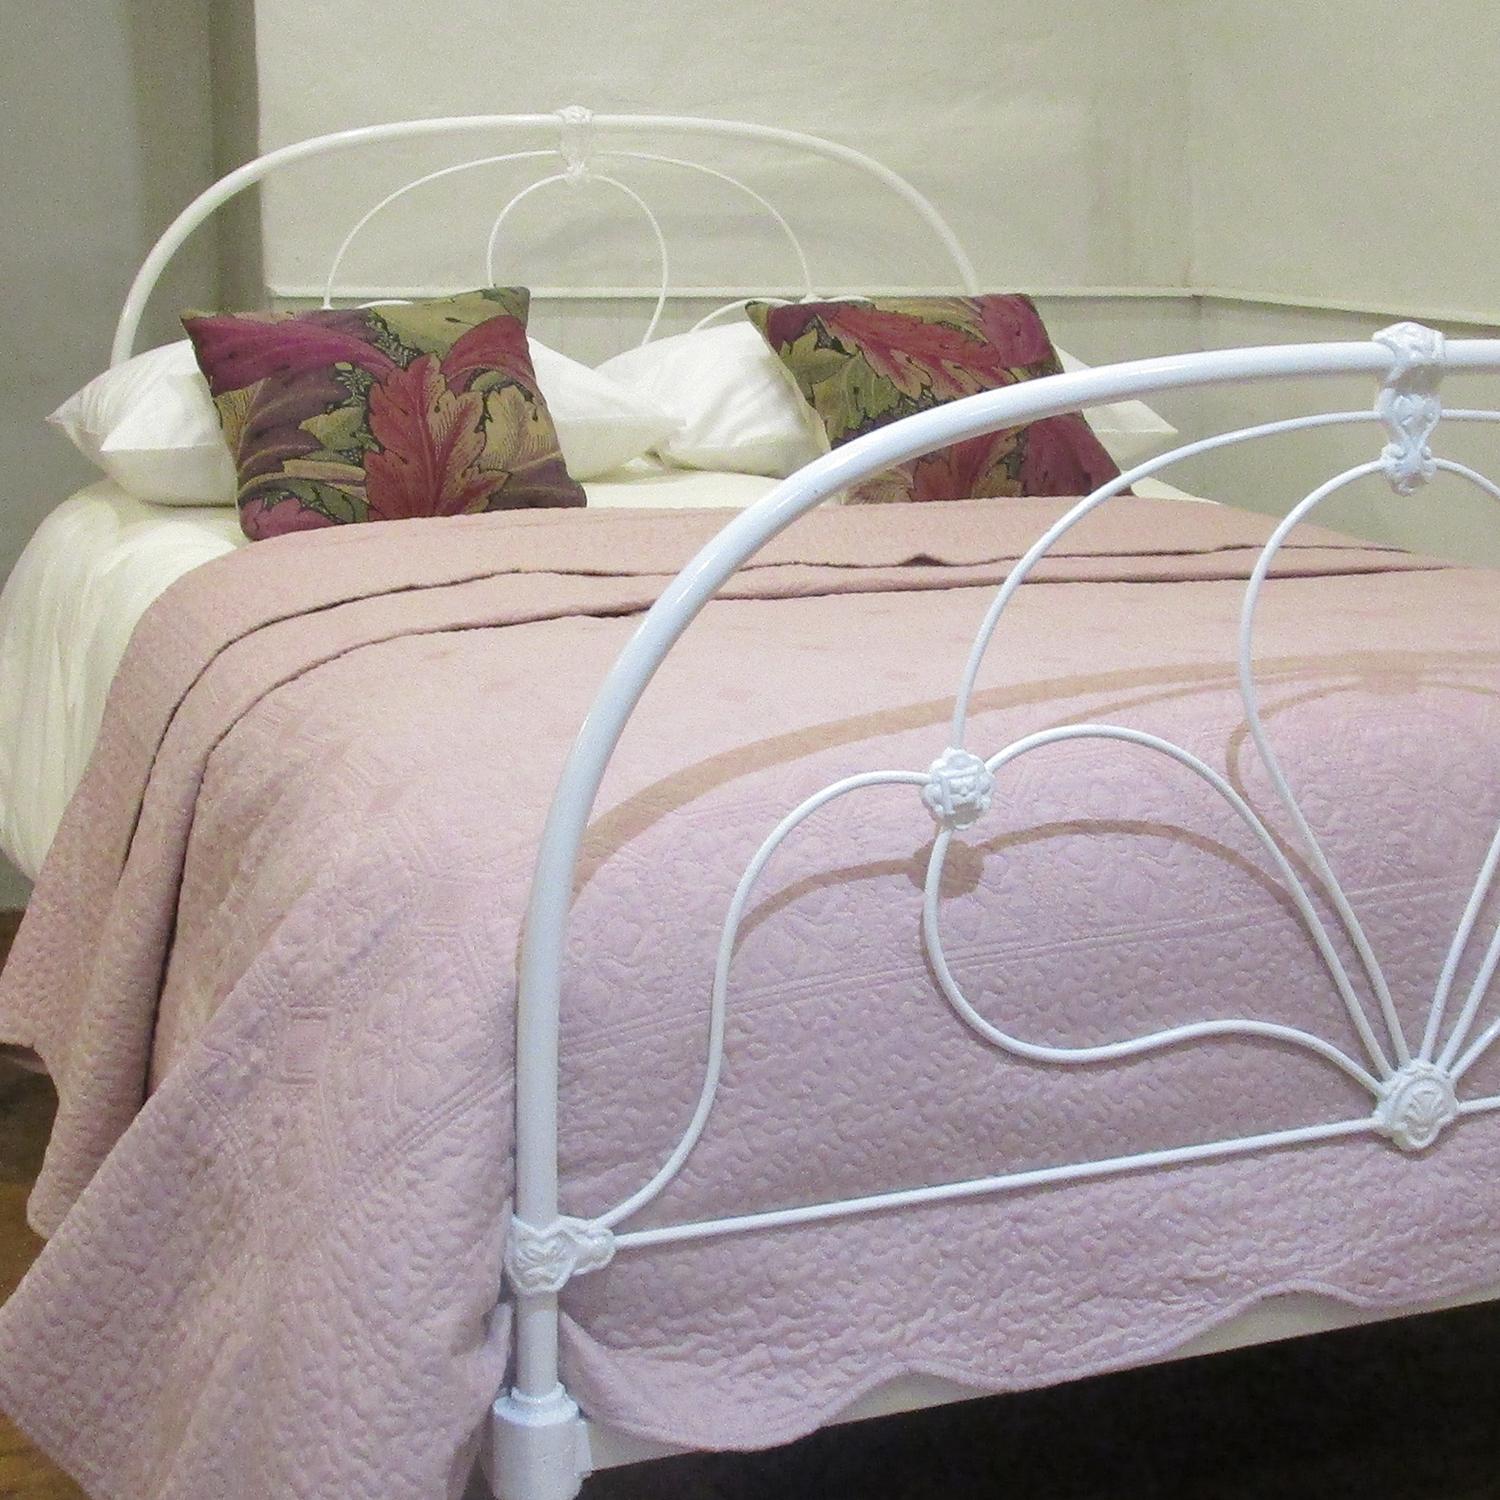 Cast iron antique bed, finished in white with simple hoop over design.

This bed accepts a double size 4ft 6in wide (54 inch or 135cm) base and mattress. 

The price includes a FIRM standard bed base to support the mattress.

The mattress,